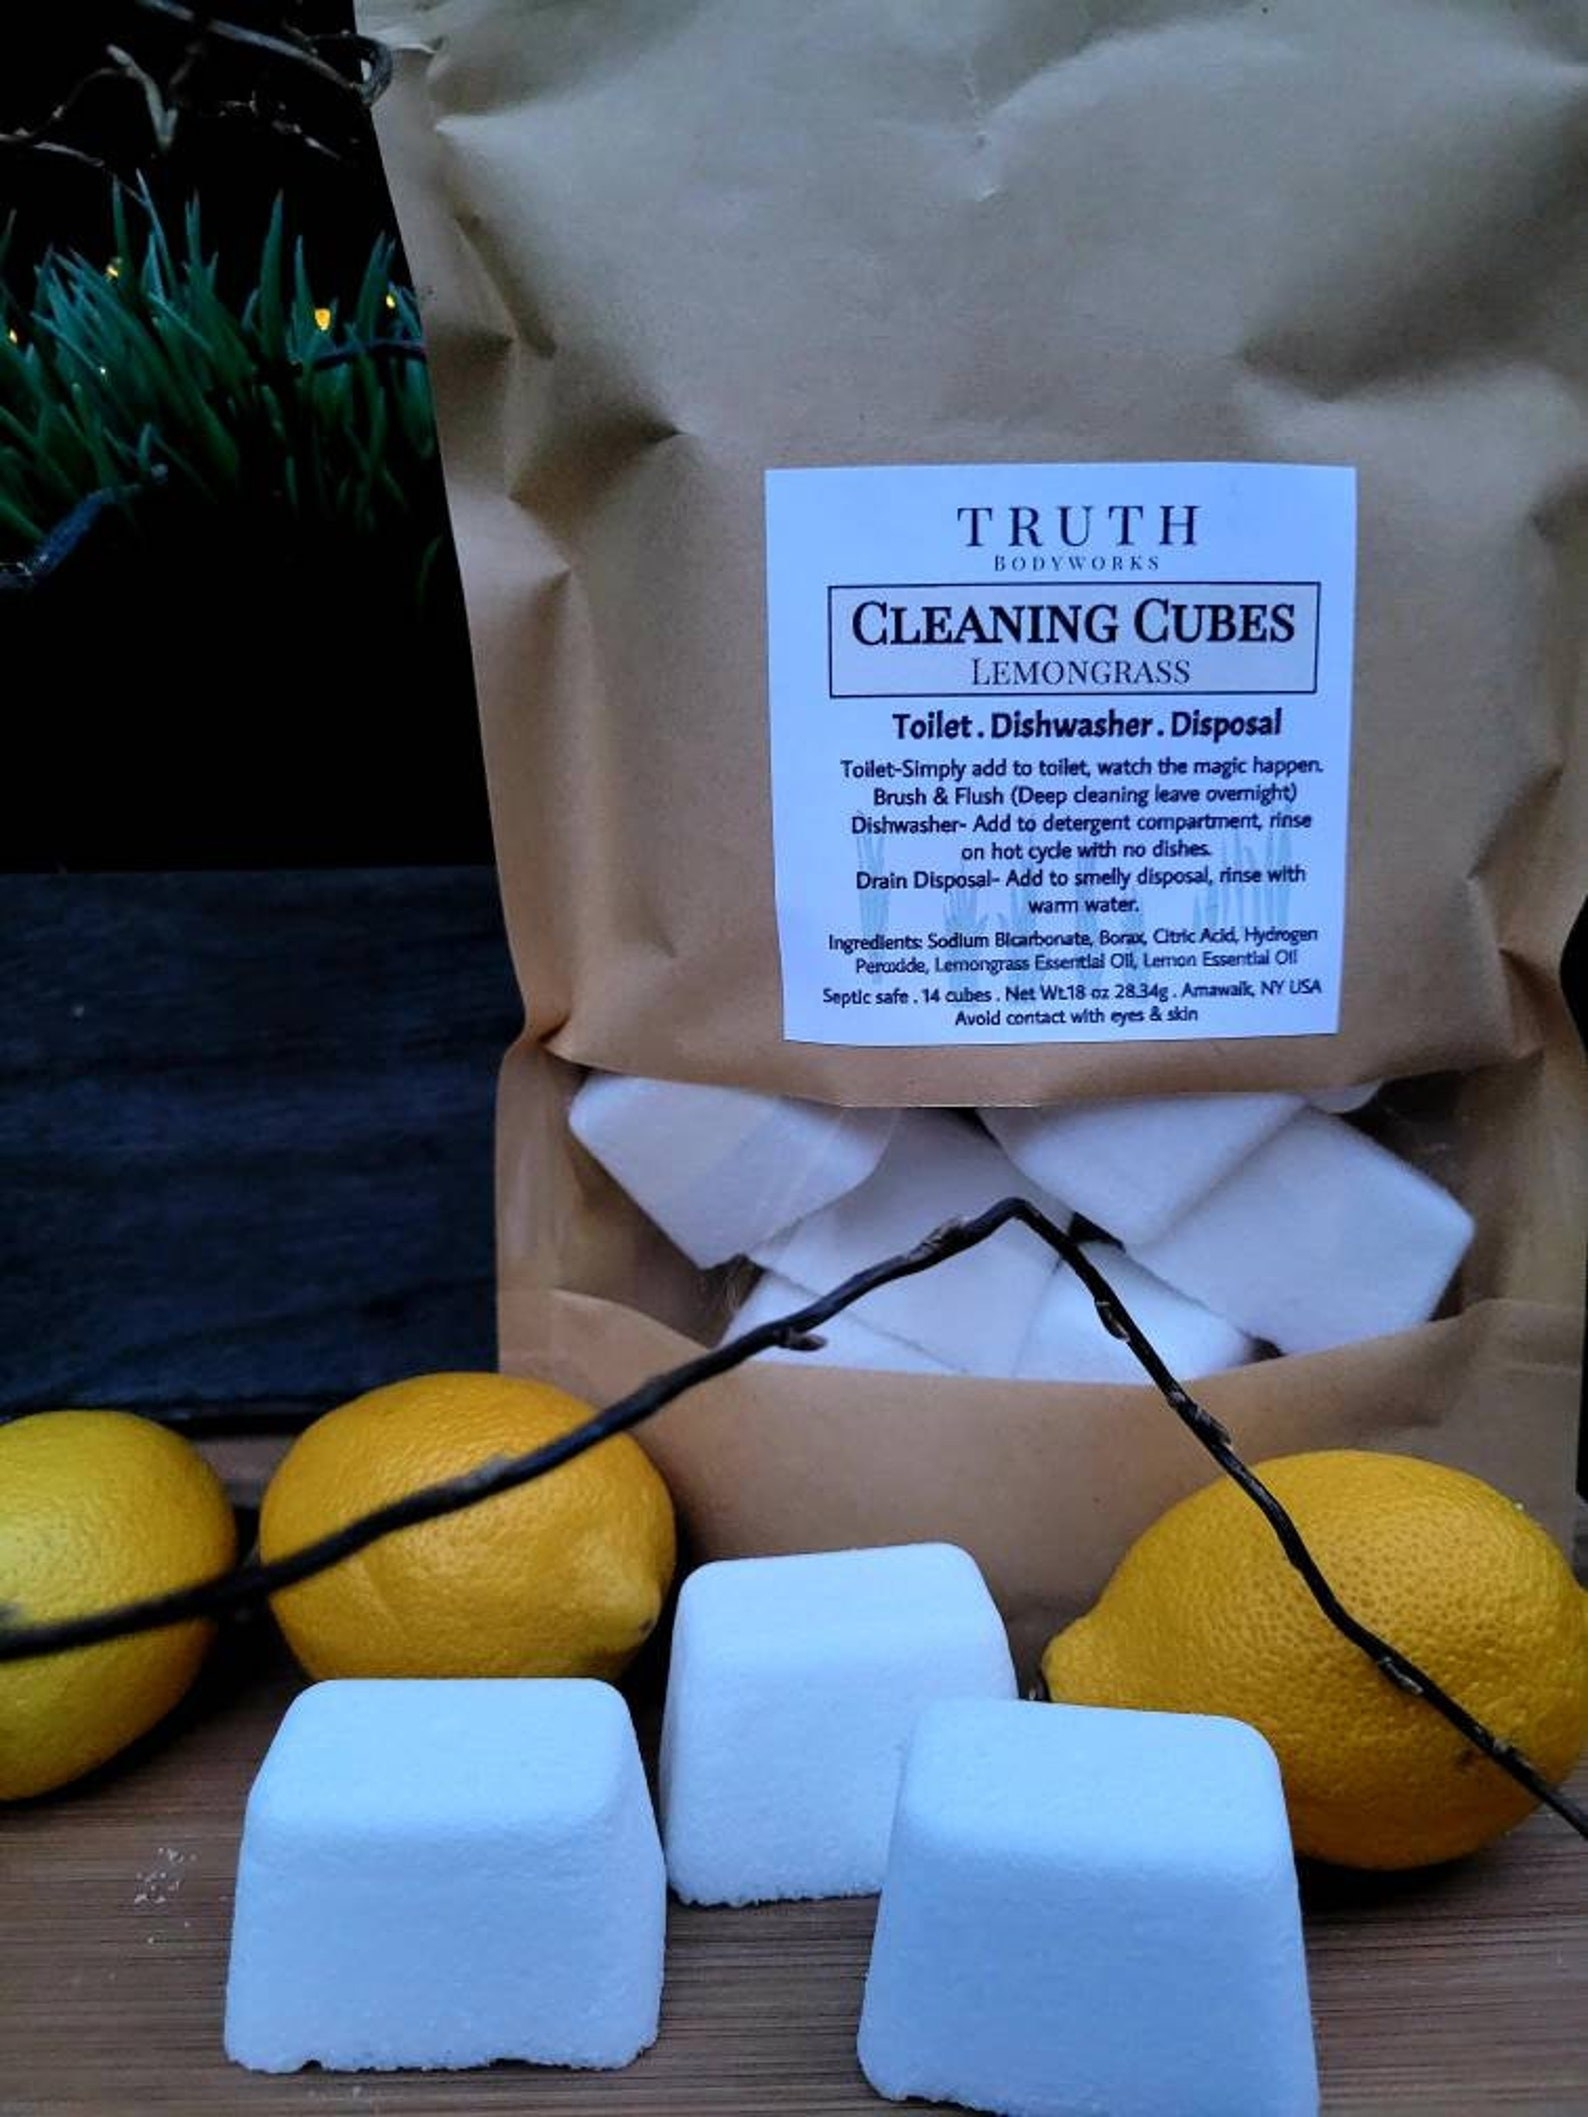 The pack of cleaning cubes in Lemongrass